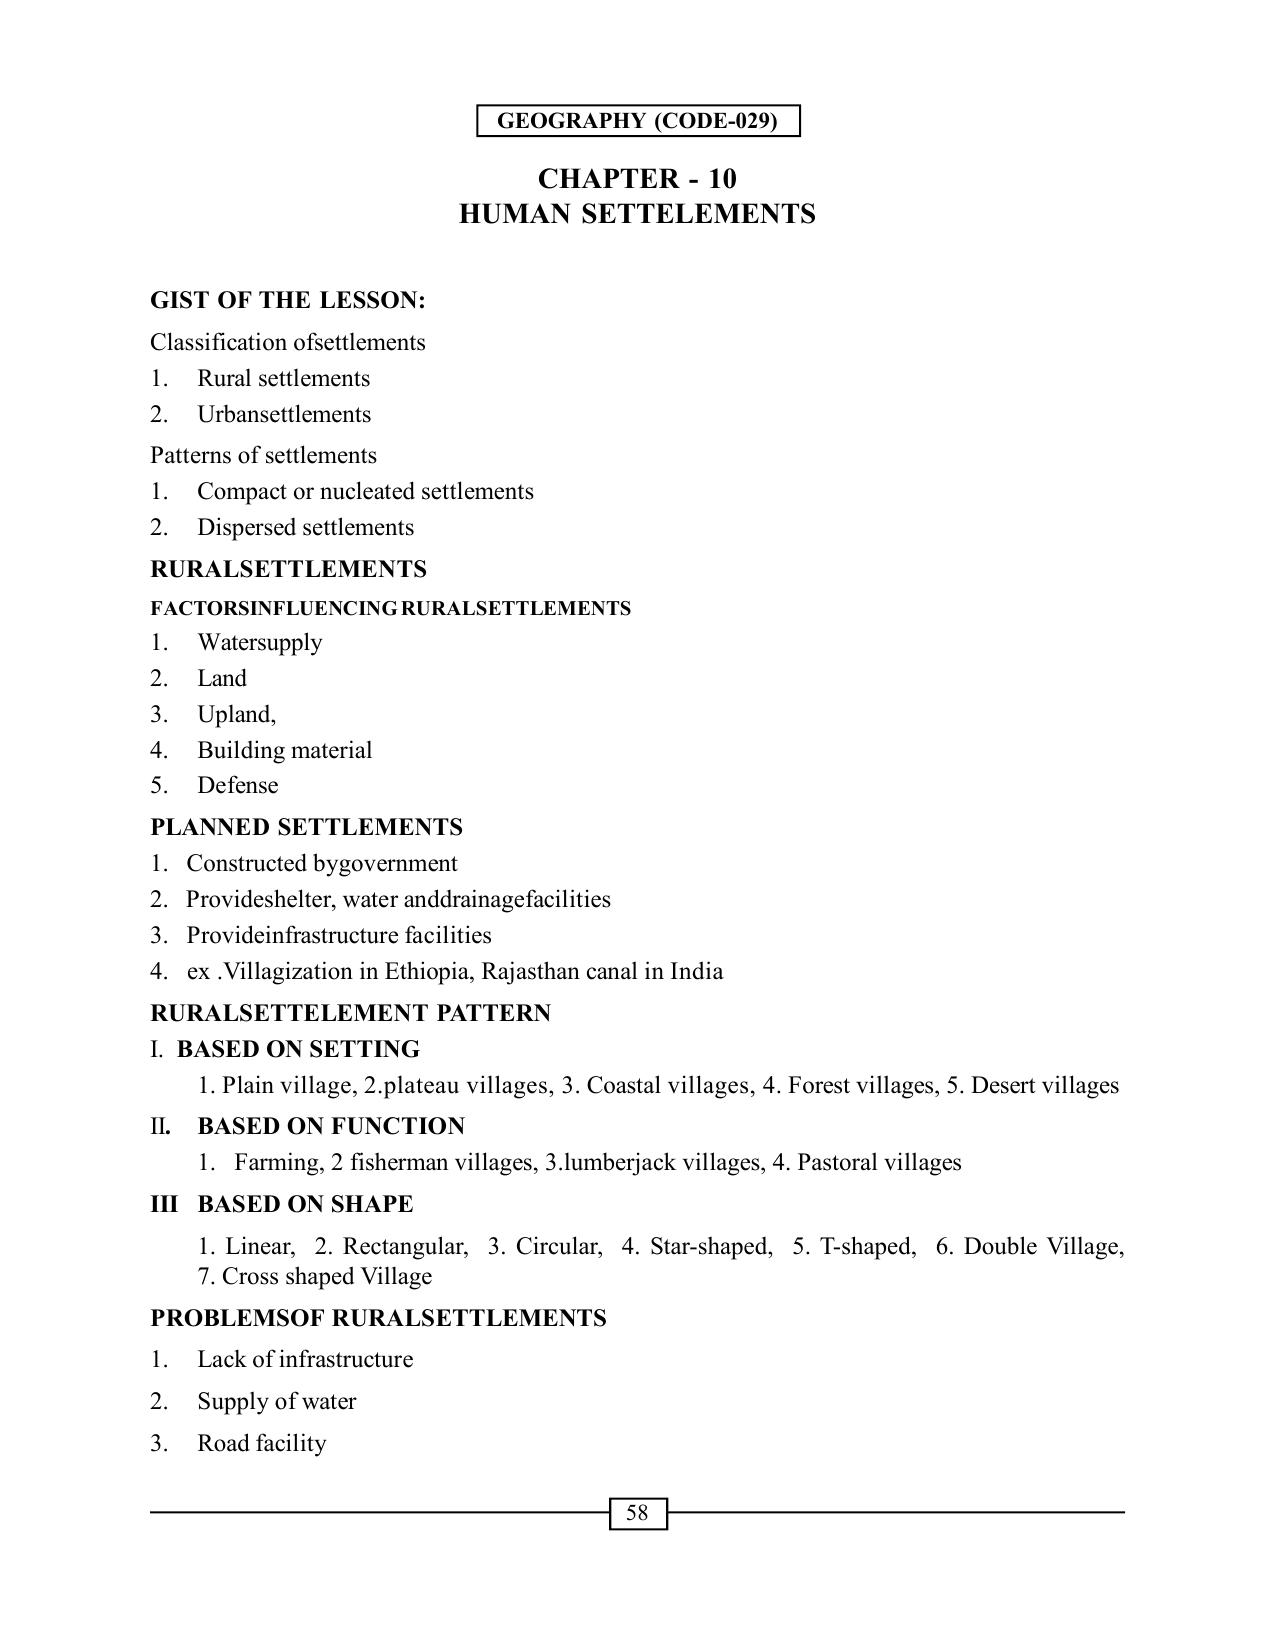 CBSE Worksheets for Class 12 Geography Human Settlements - Page 1